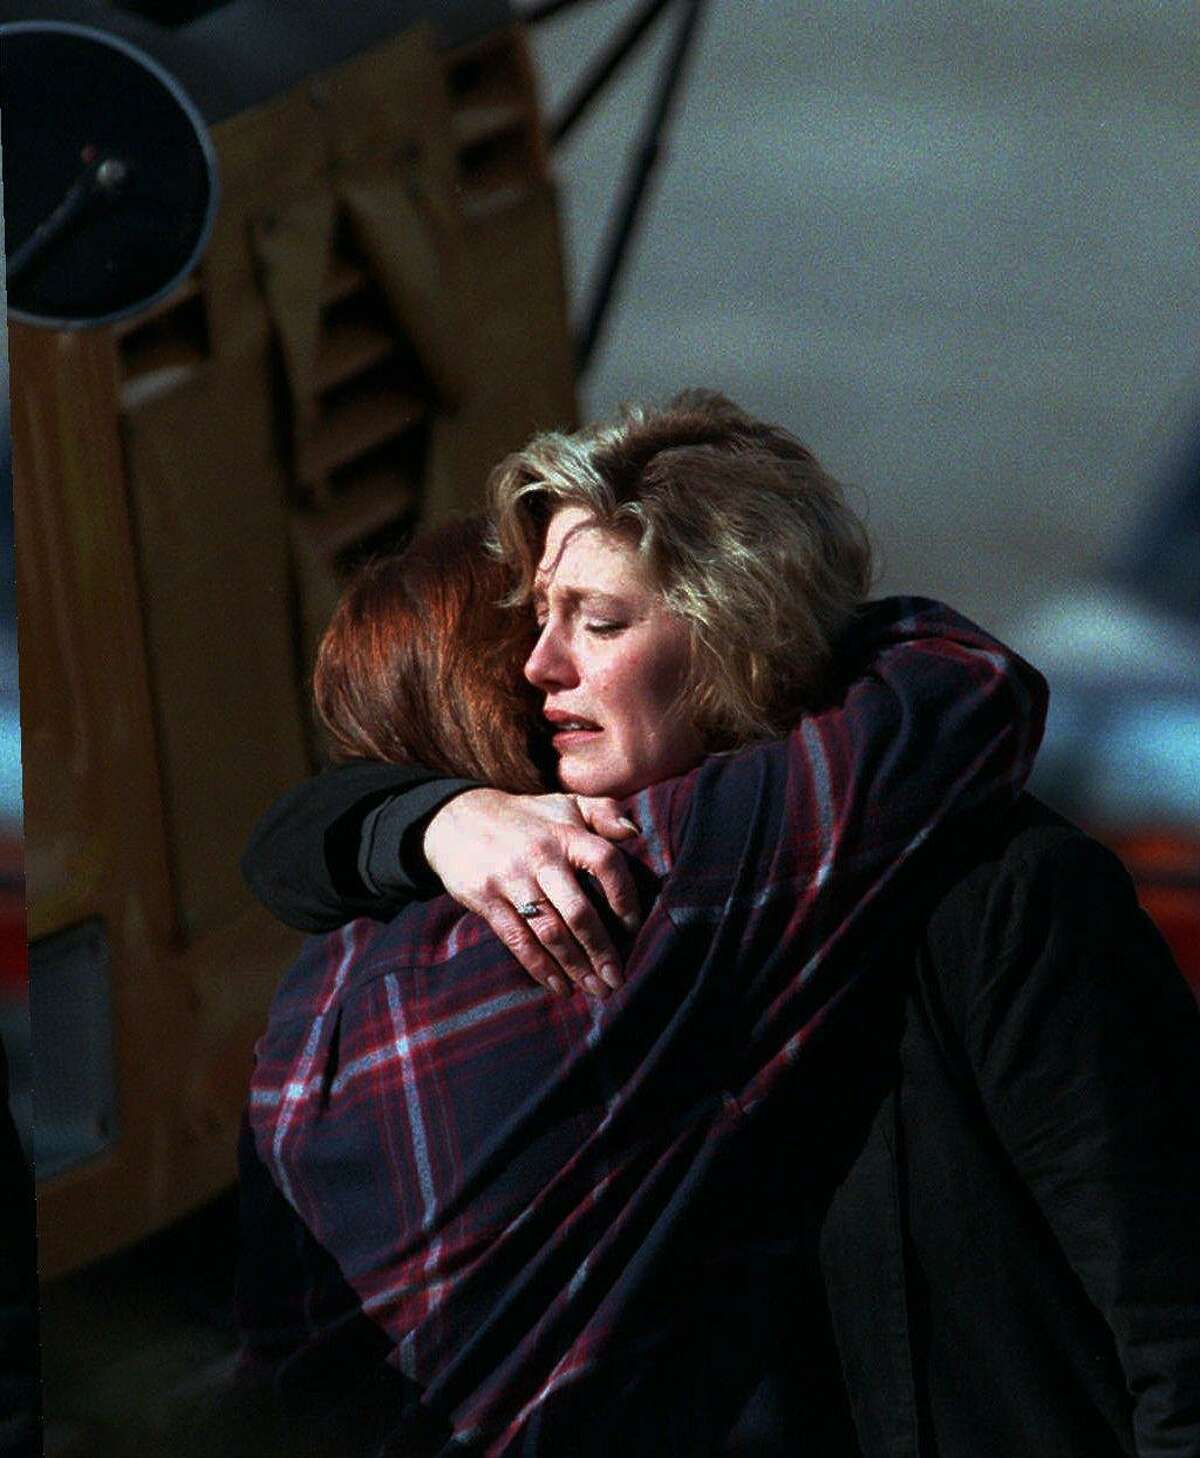 State lottery workers comfort each other outside Connecticut Lottery headquarters in Newington on March 6, 1998, after a lottery employee shot four people to death and then turned the gun on himself.